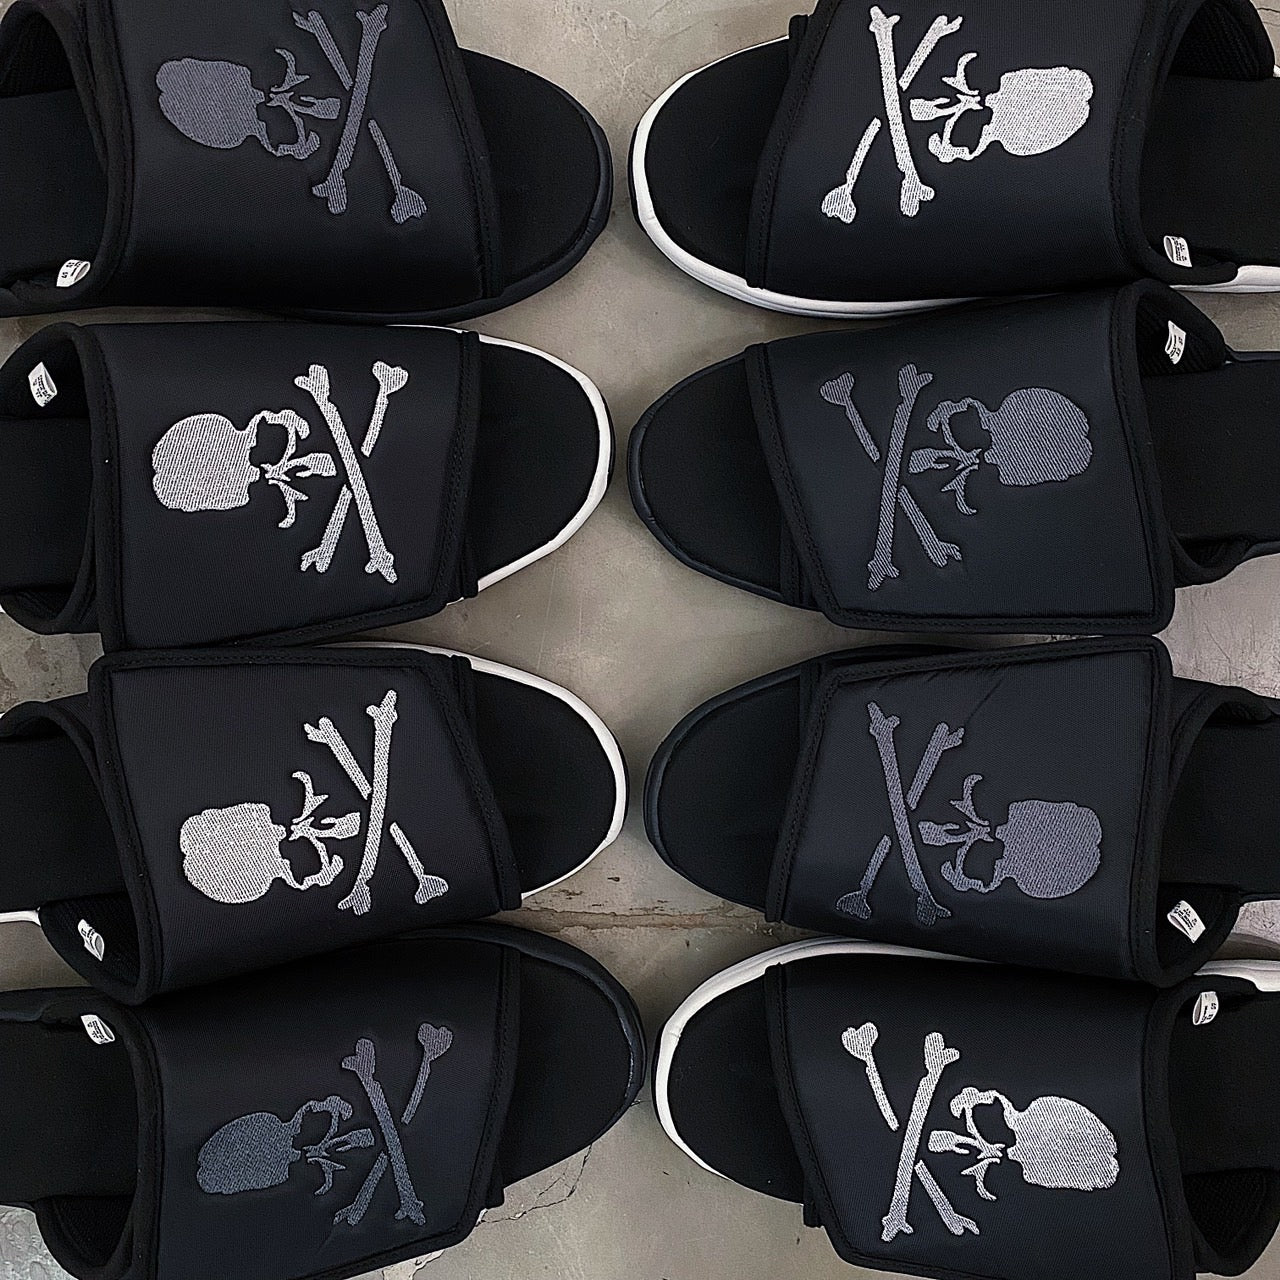 【MASTERMIND×SUICOKE】<br> The new collaboration sandals will be pre-sold online tomorrow from 10:00 on 6/3 (Sat.)!